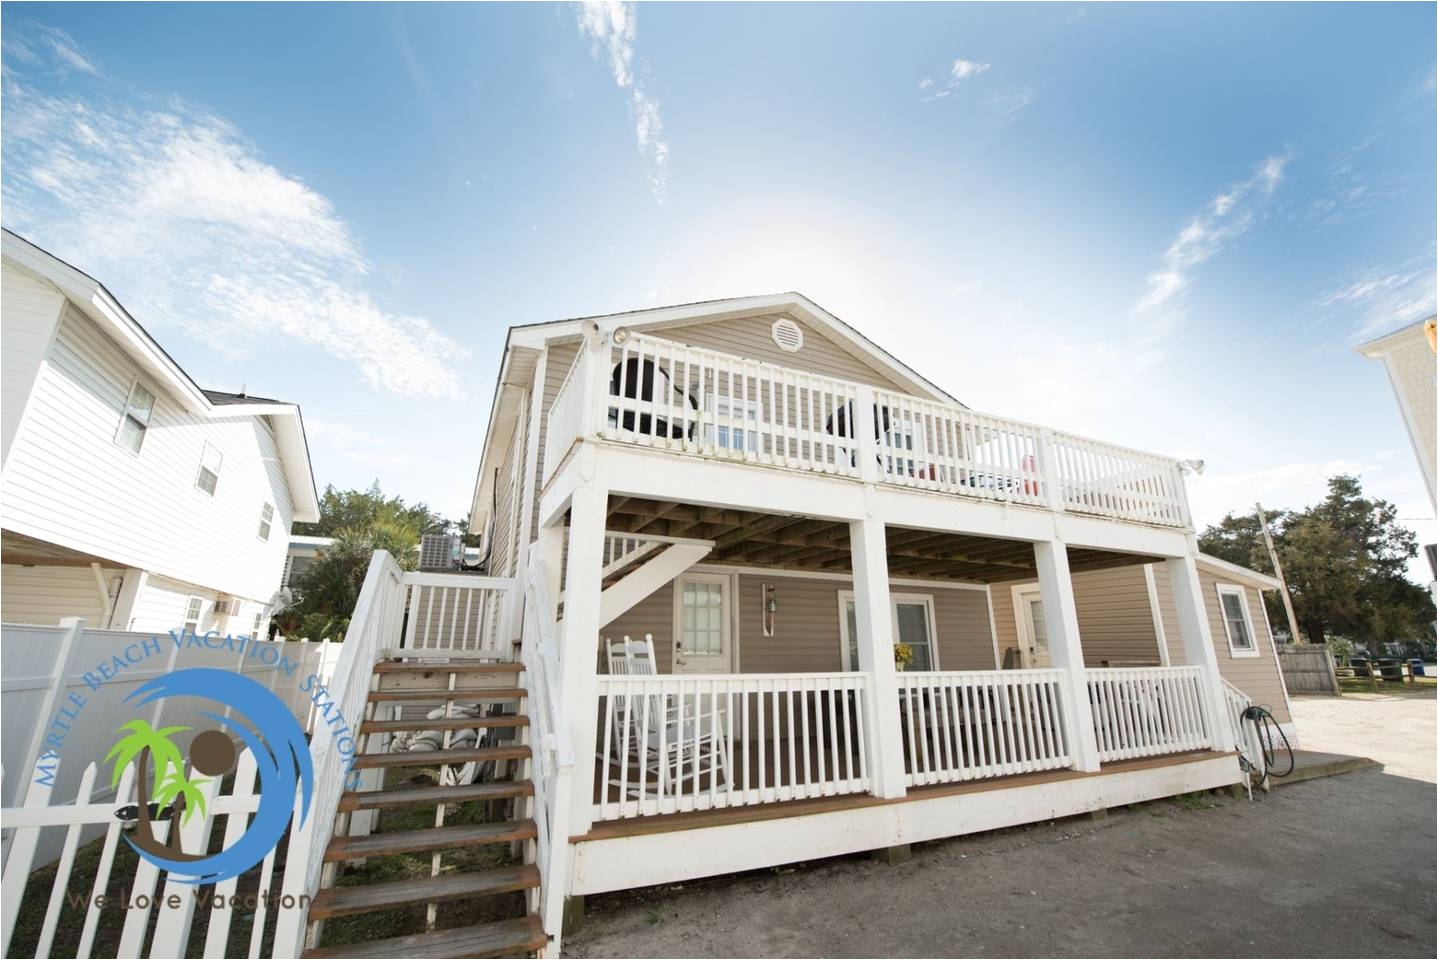 cherry grove beach cottage up houses for rent in north myrtle beach south carolina united states